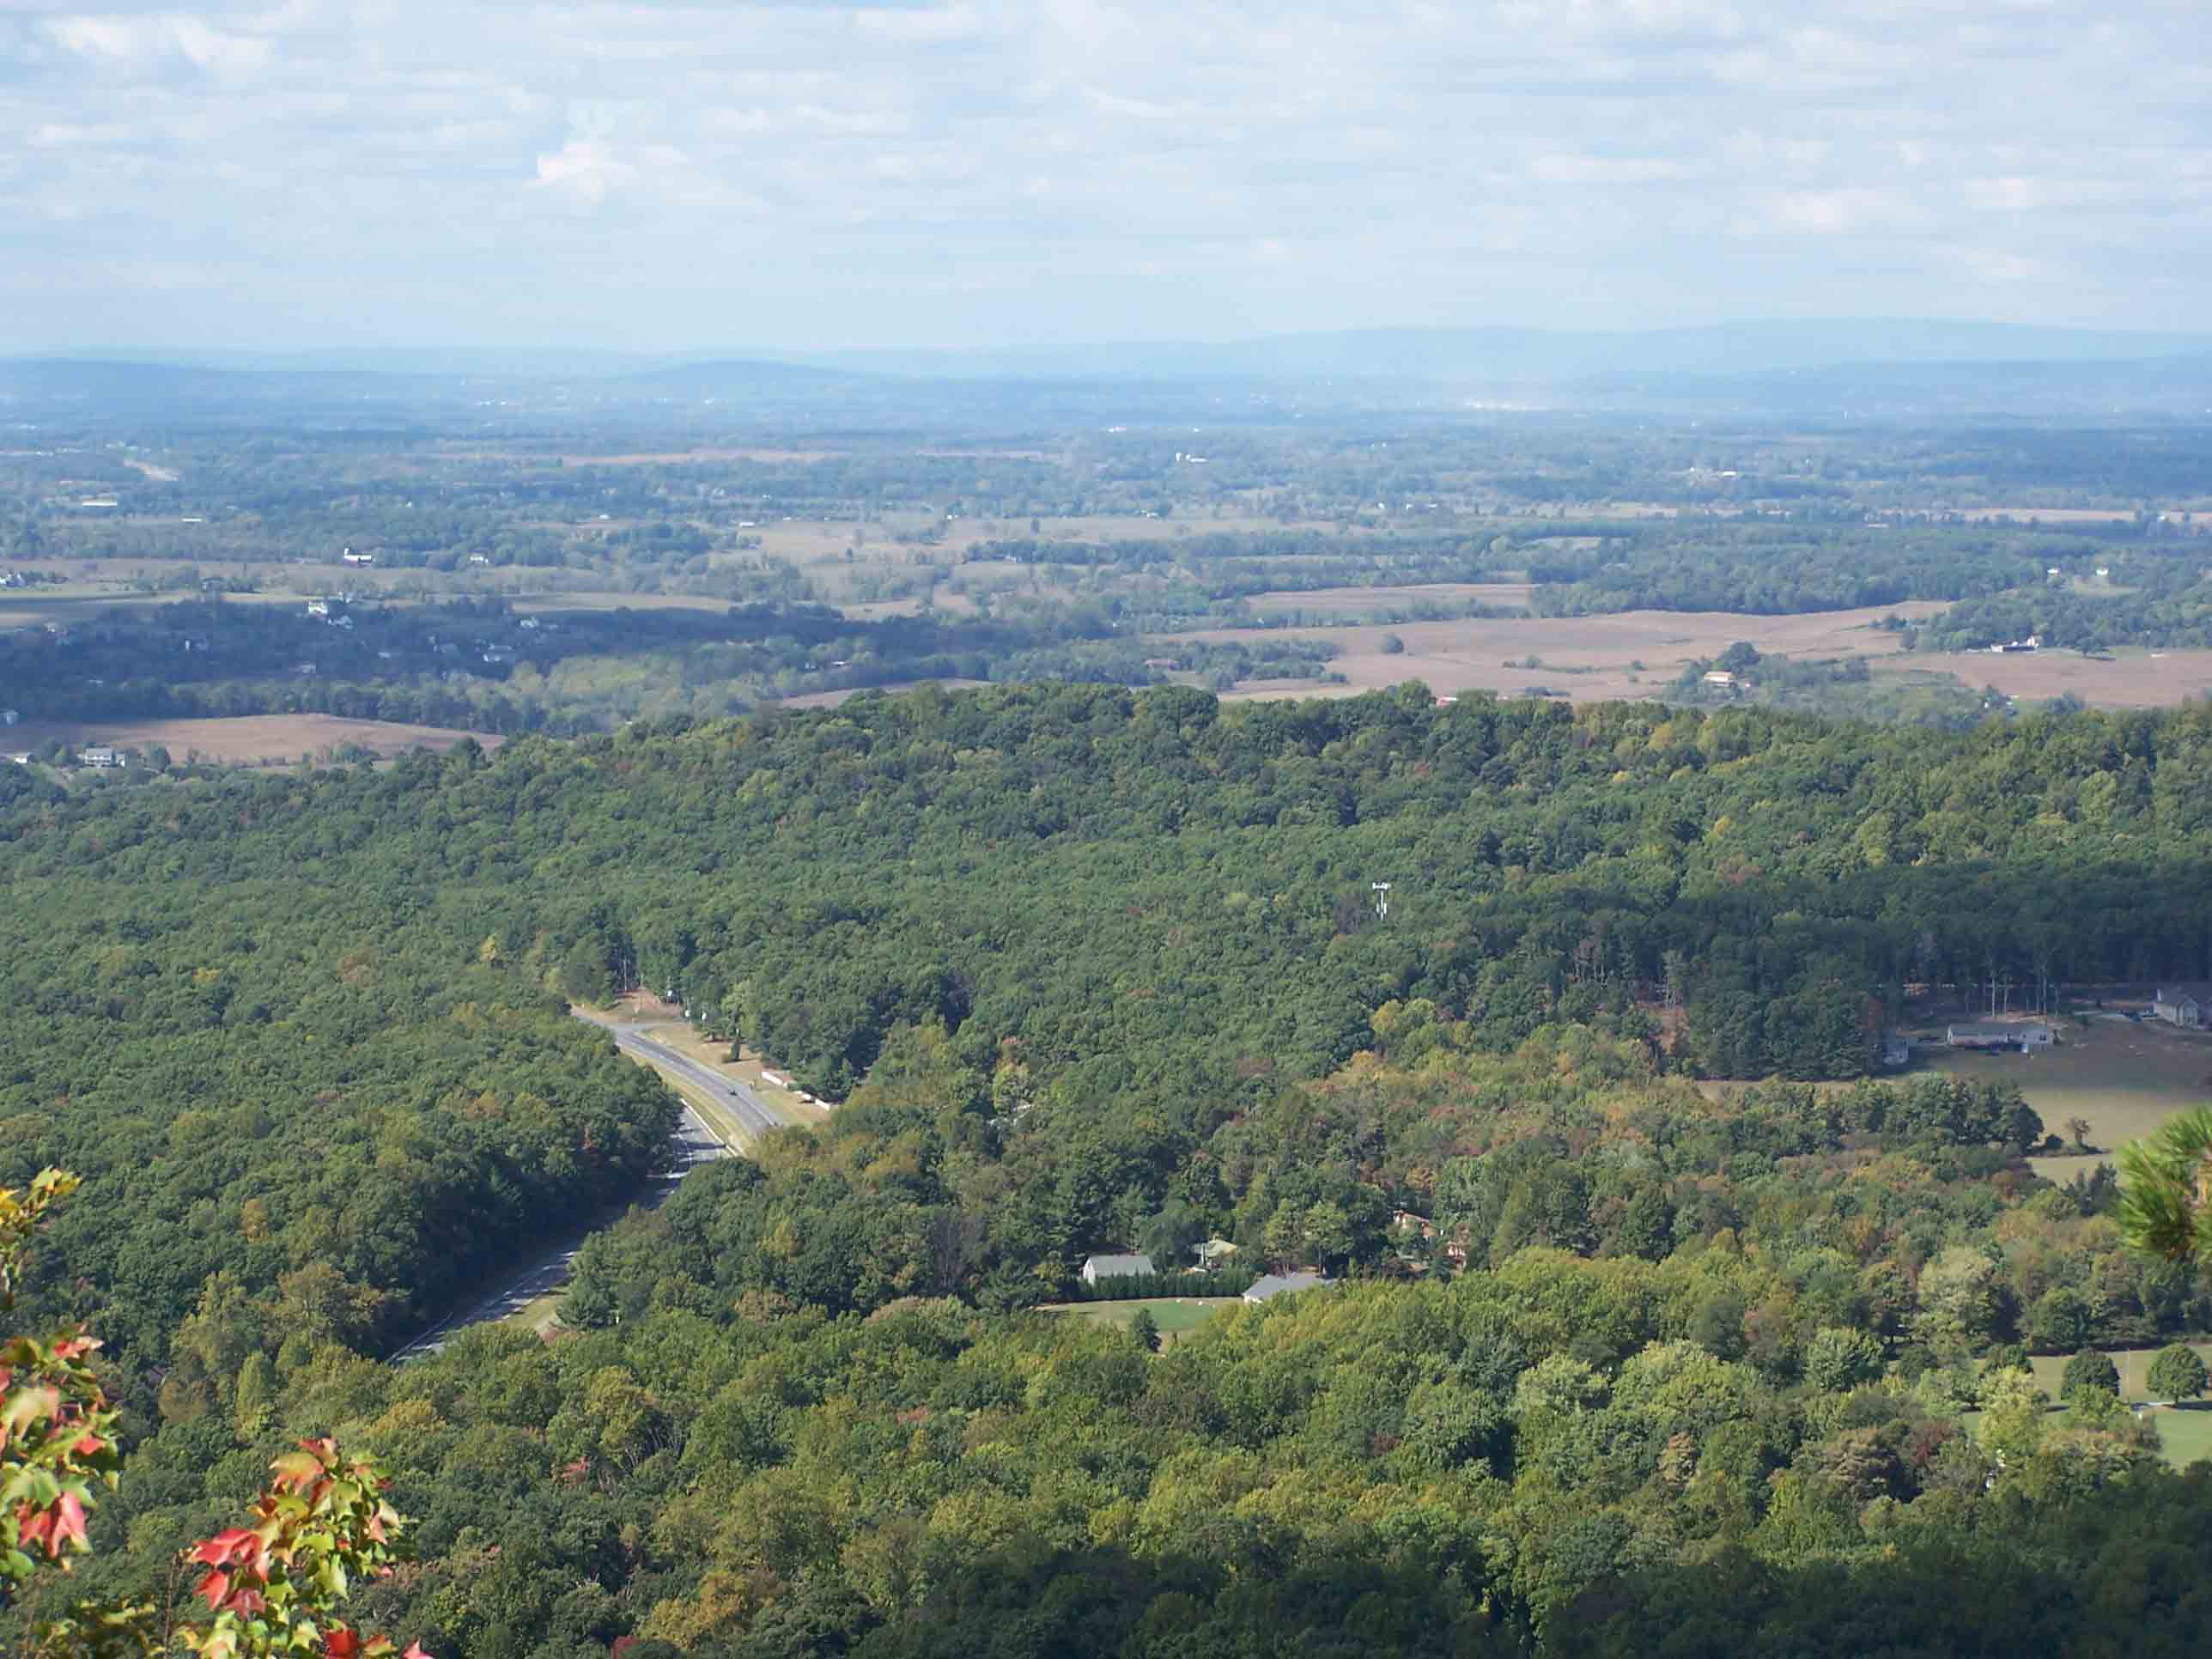 mm 0.6 - View from Bears Den Rocks. Courtesy at@rohland.org